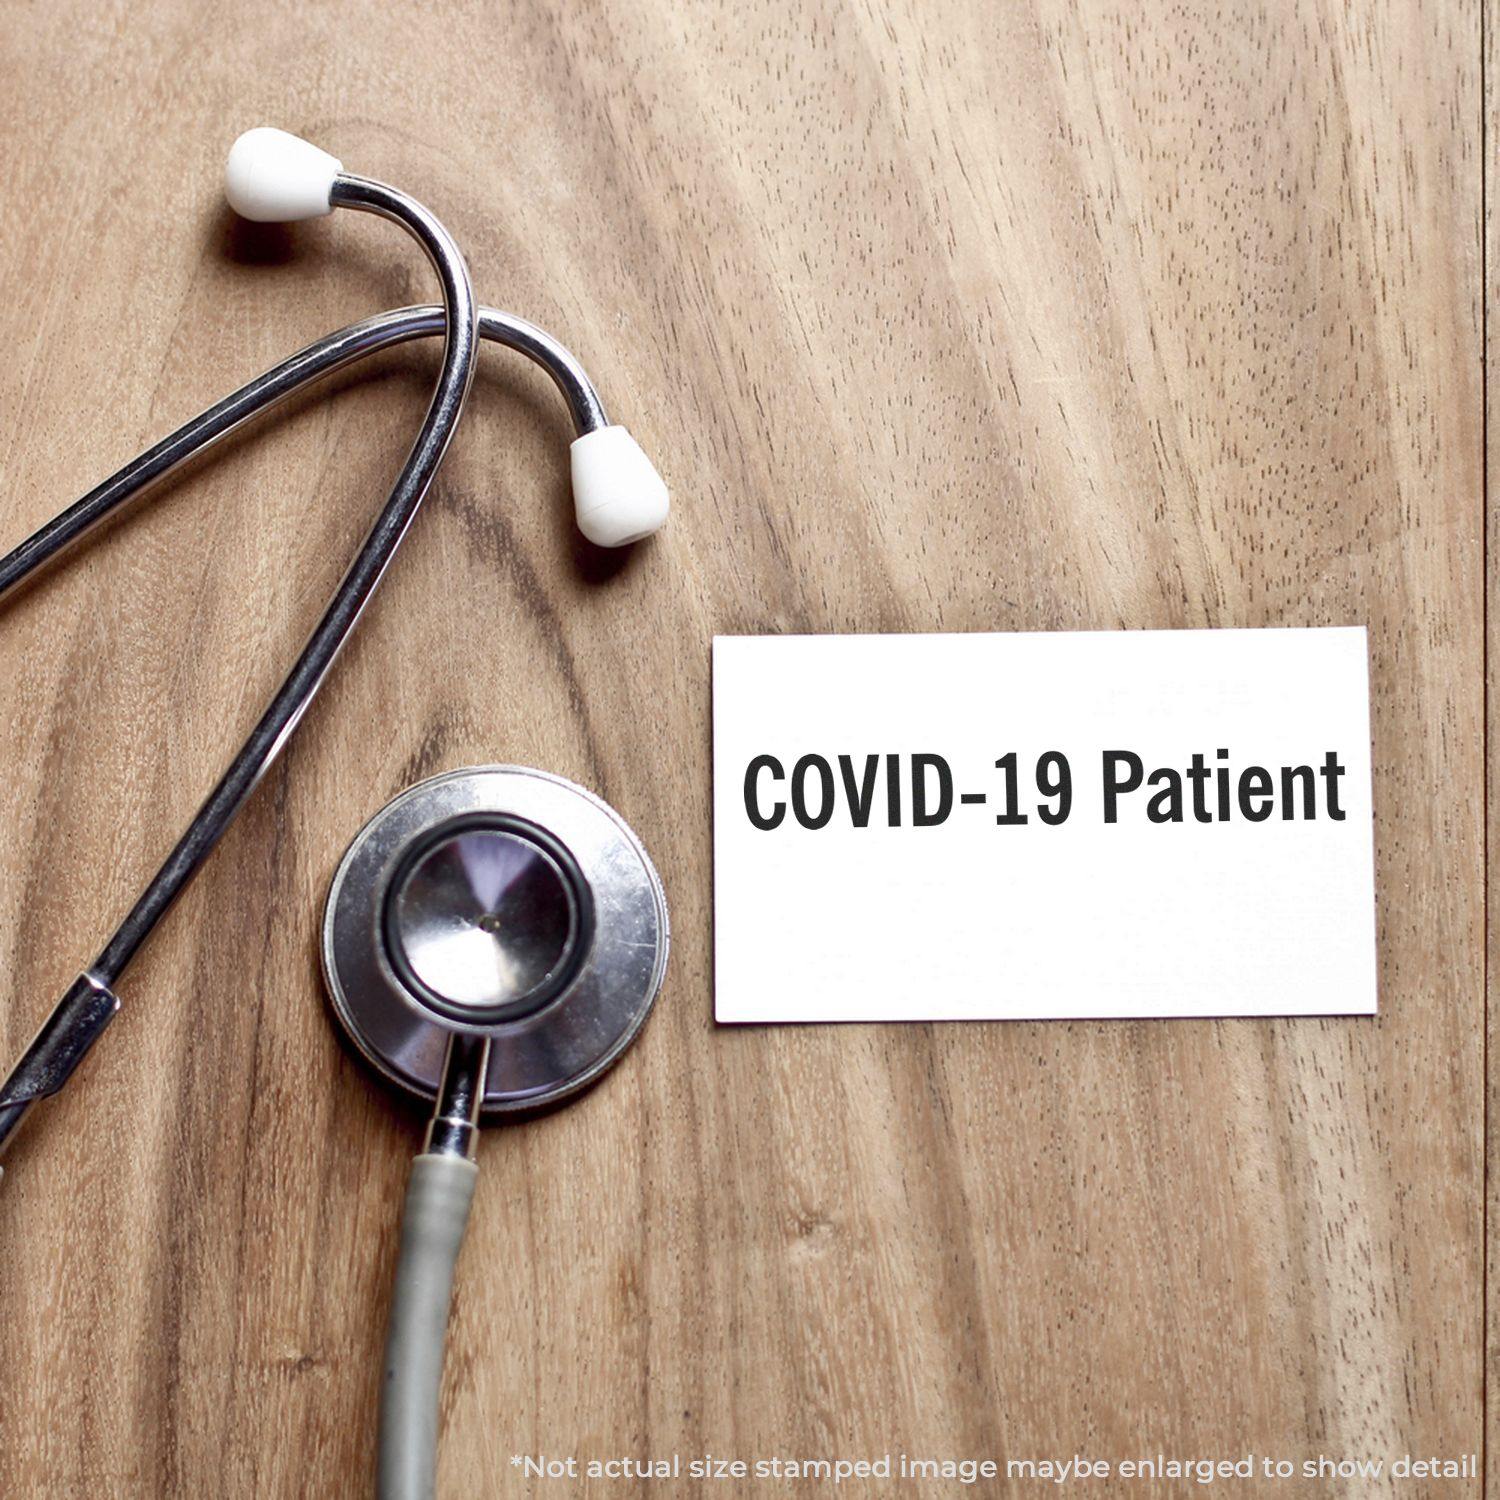 A stock office rubber stamp with a stamped image showing how the text "COVID-19 Patient" is displayed after stamping.